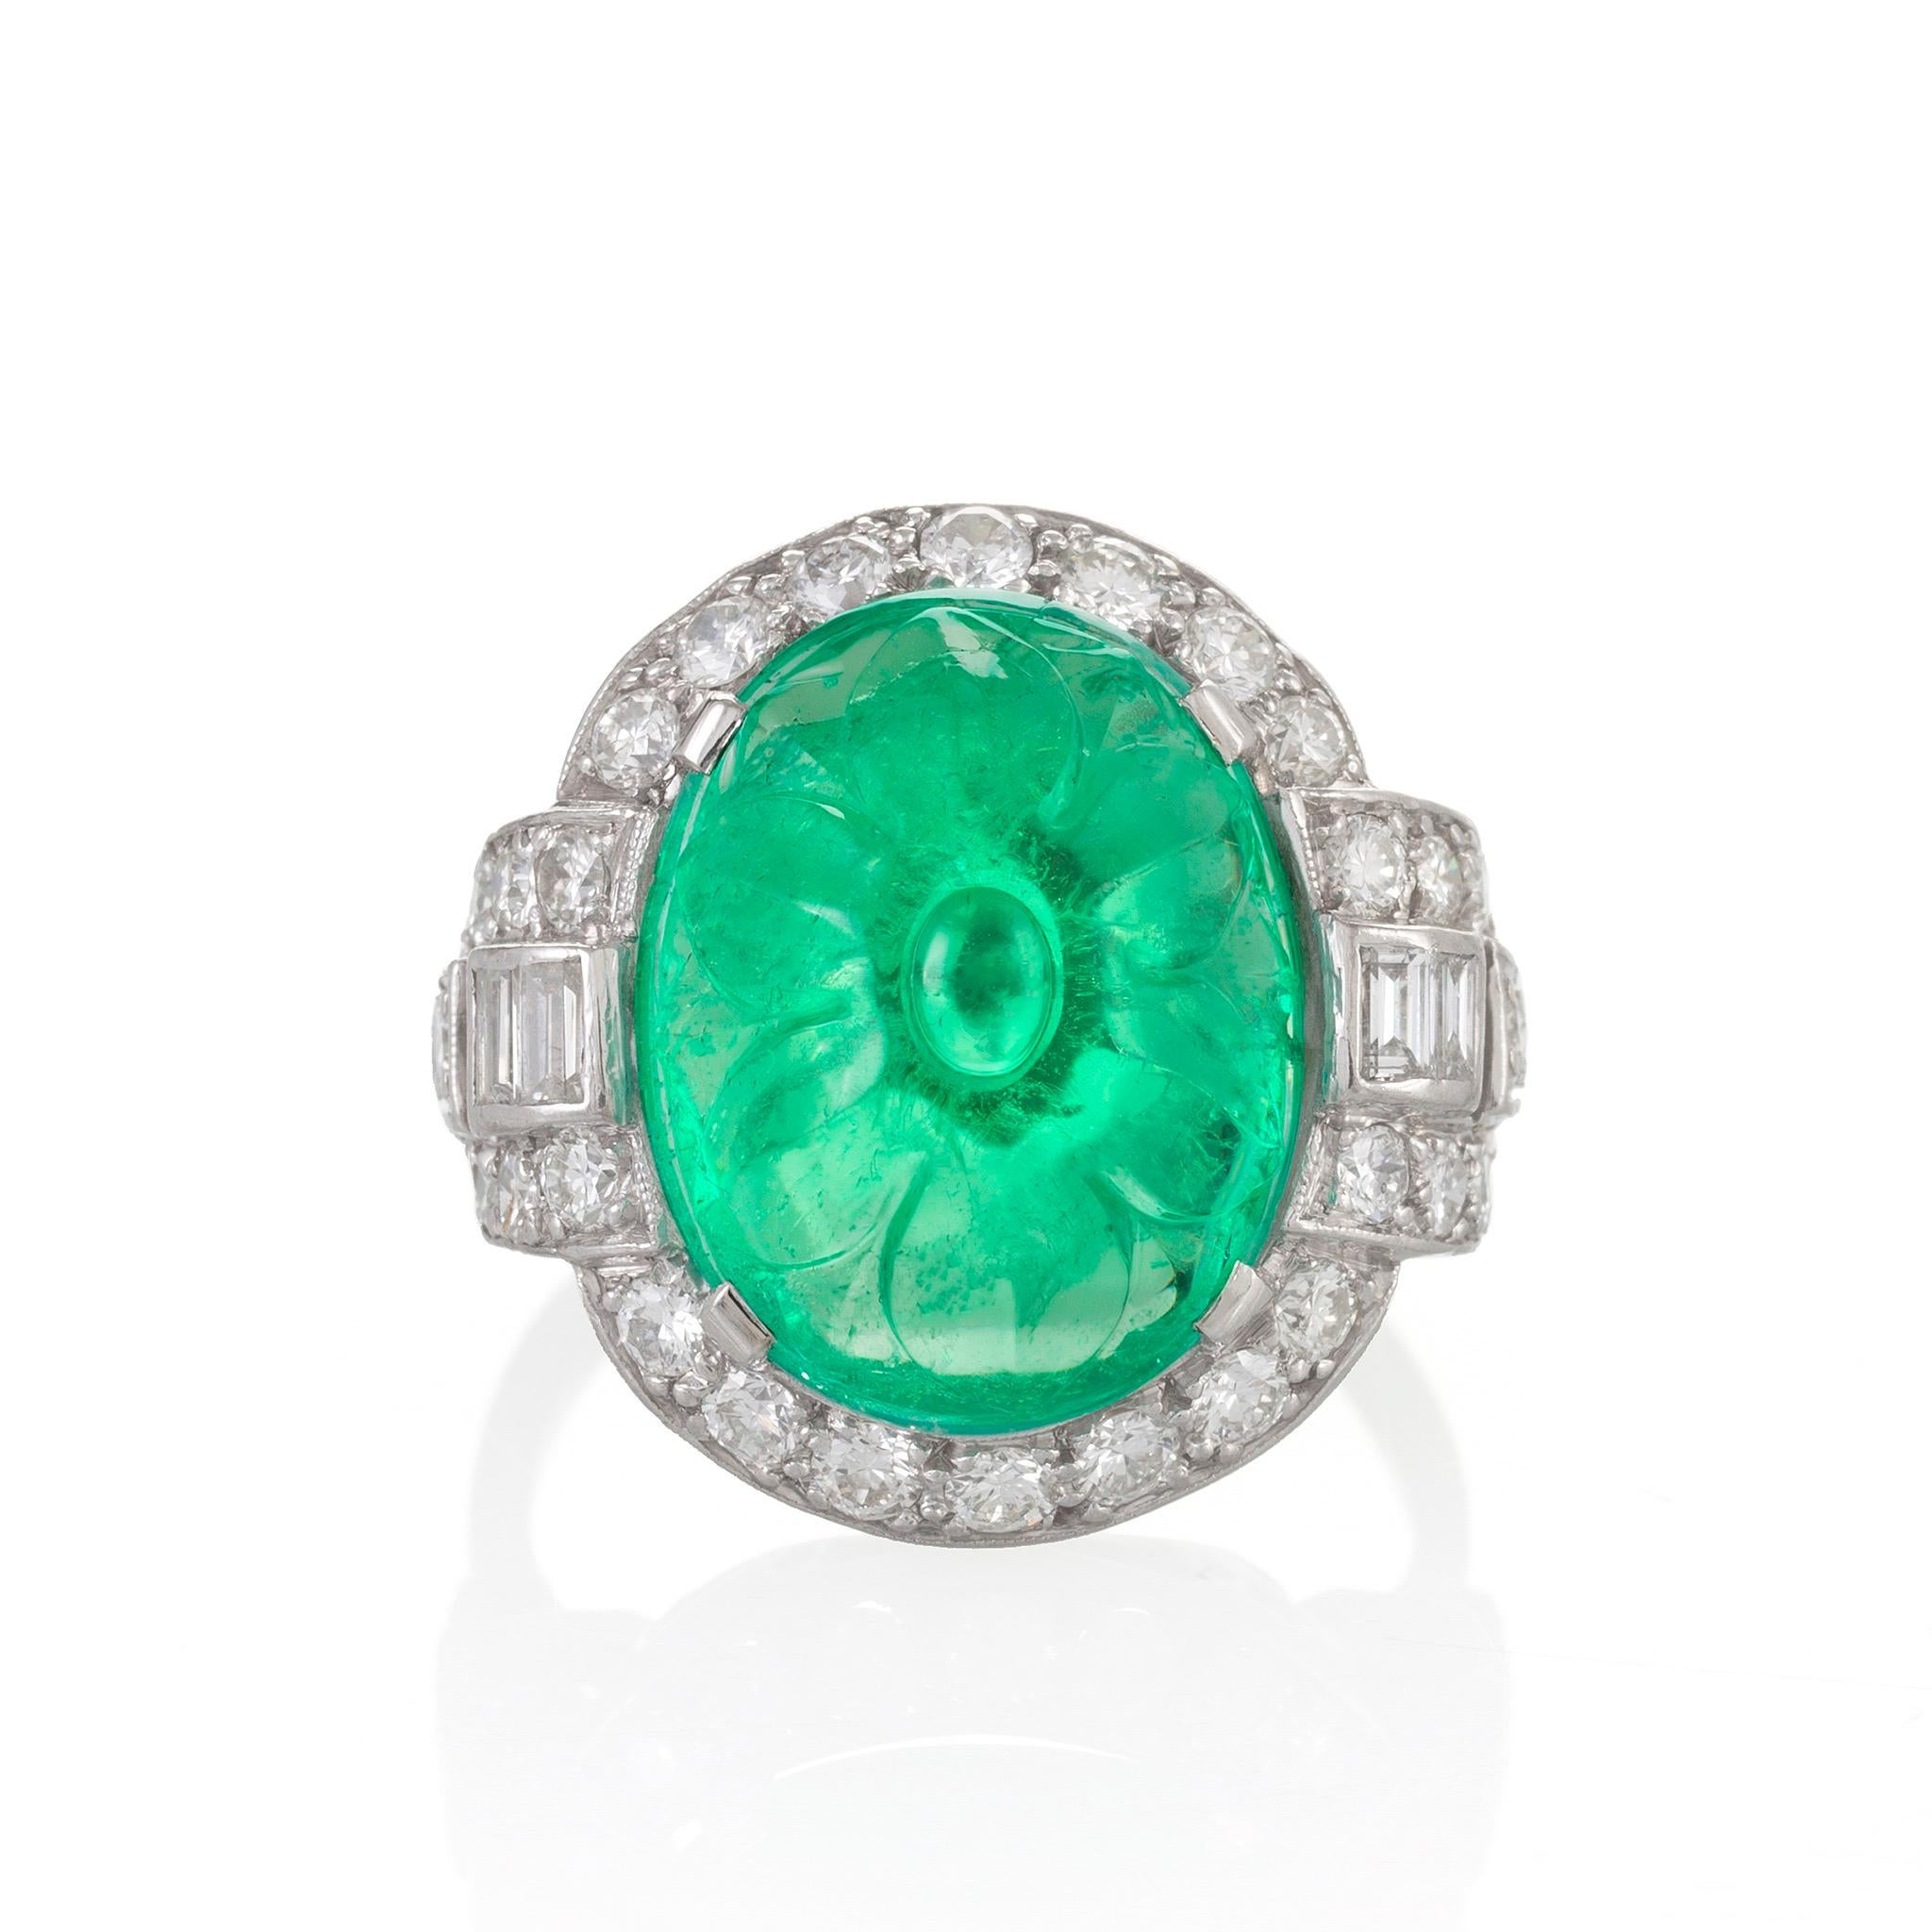 This colorful Art Deco platinum ring, dating from the 1920s, is set with a floral-carved emerald cabochon weighing over eight carats, framed by sparkling diamonds. The substantial emerald is carved as a blossoming flower with full and elongated